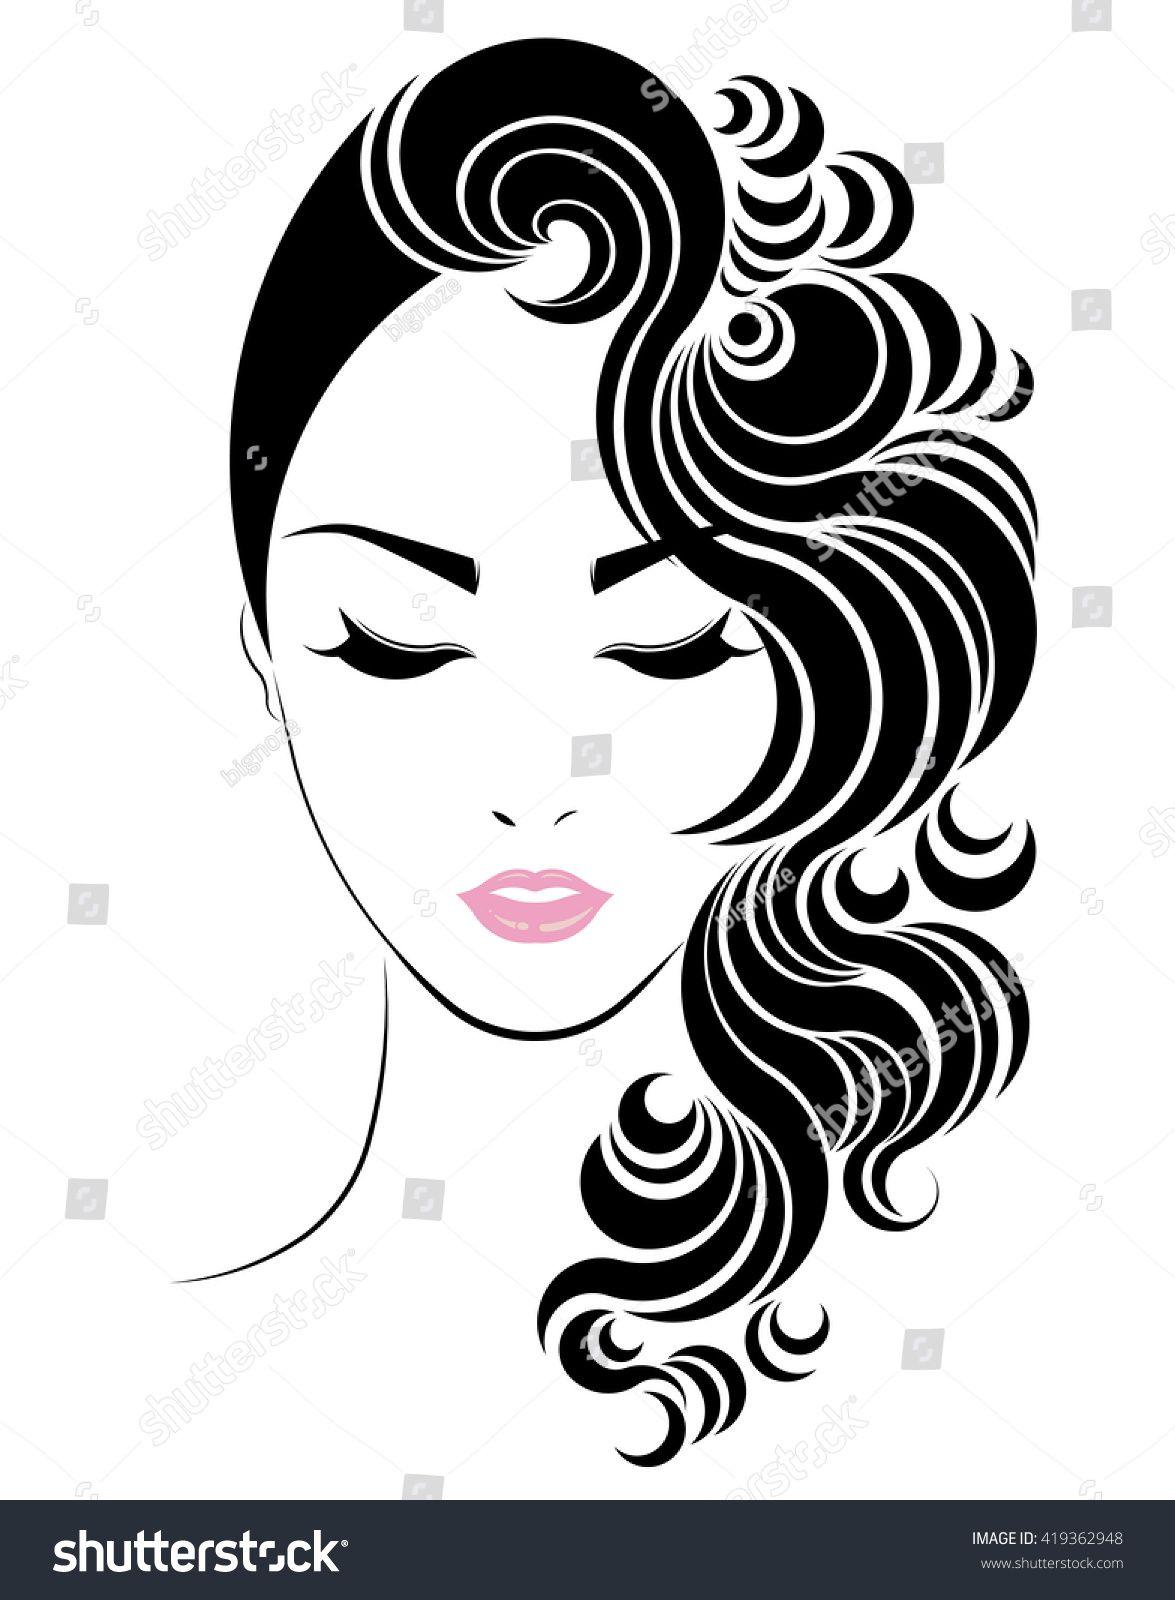 Woman with Flowing Hair Logo - Long hair style icon, logo women face on white background, vector ...